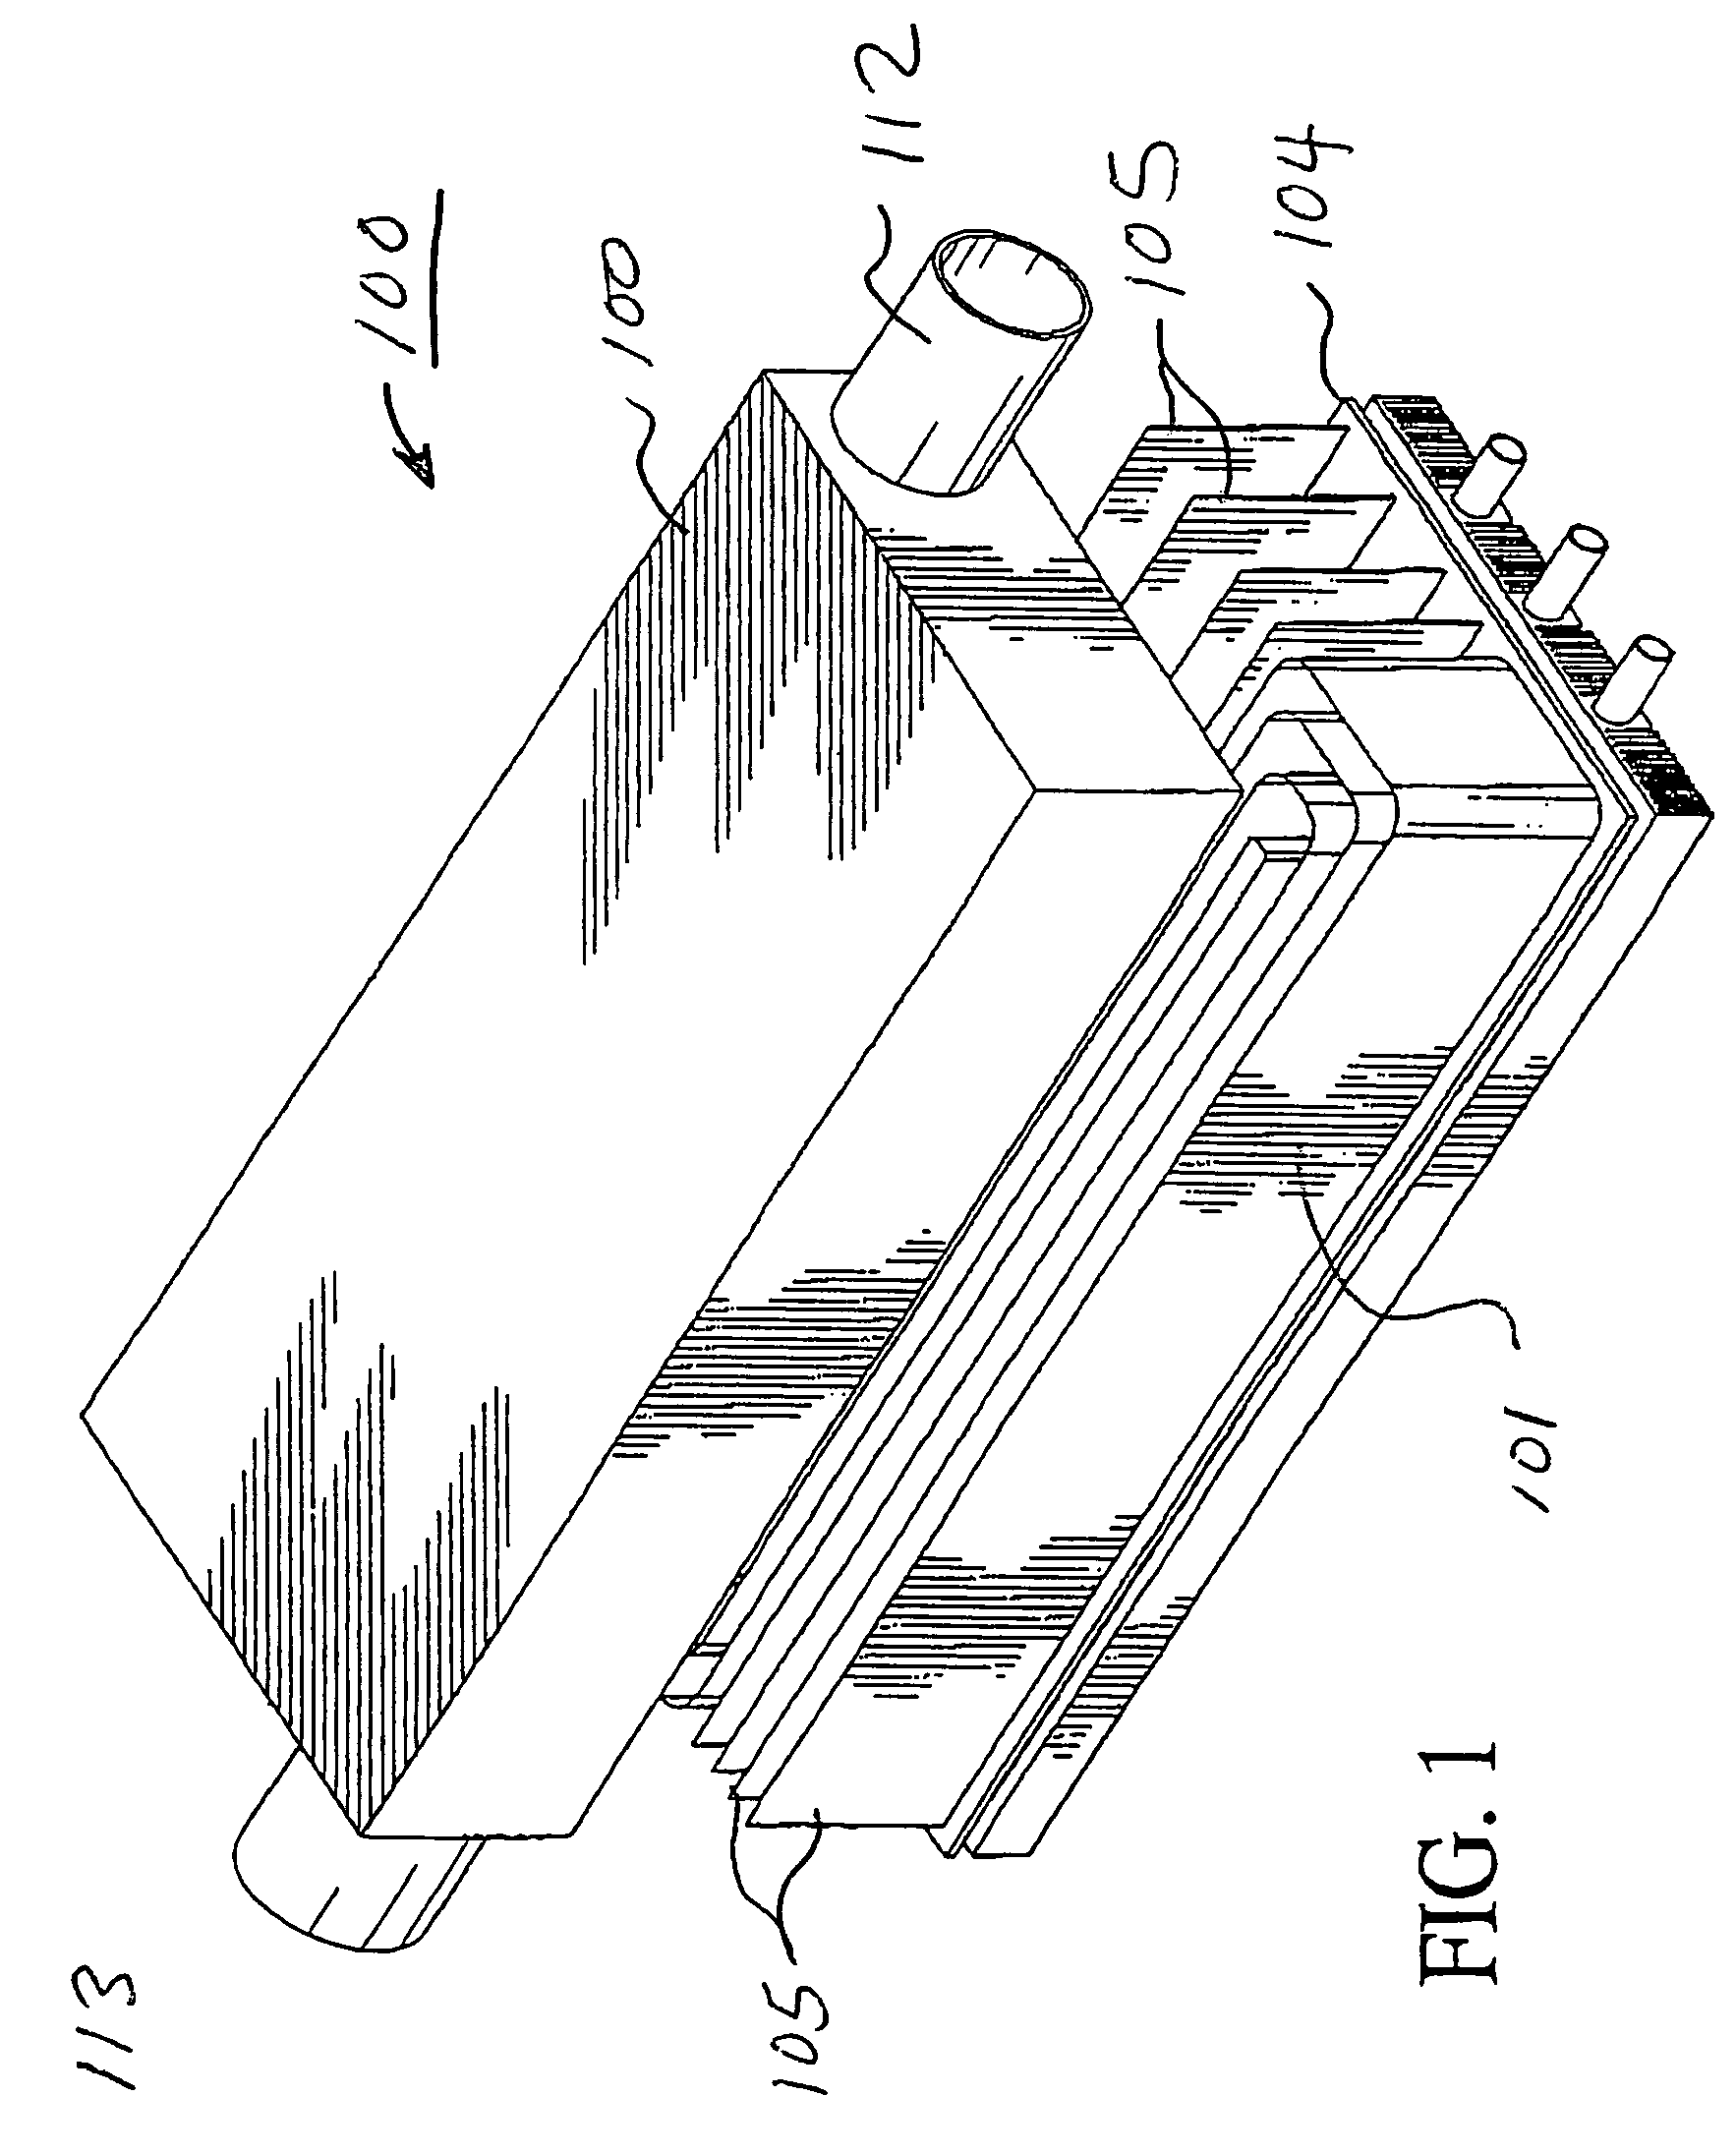 Flow-through mufflers with optional thermo-electric, sound cancellation, and tuning capabilities